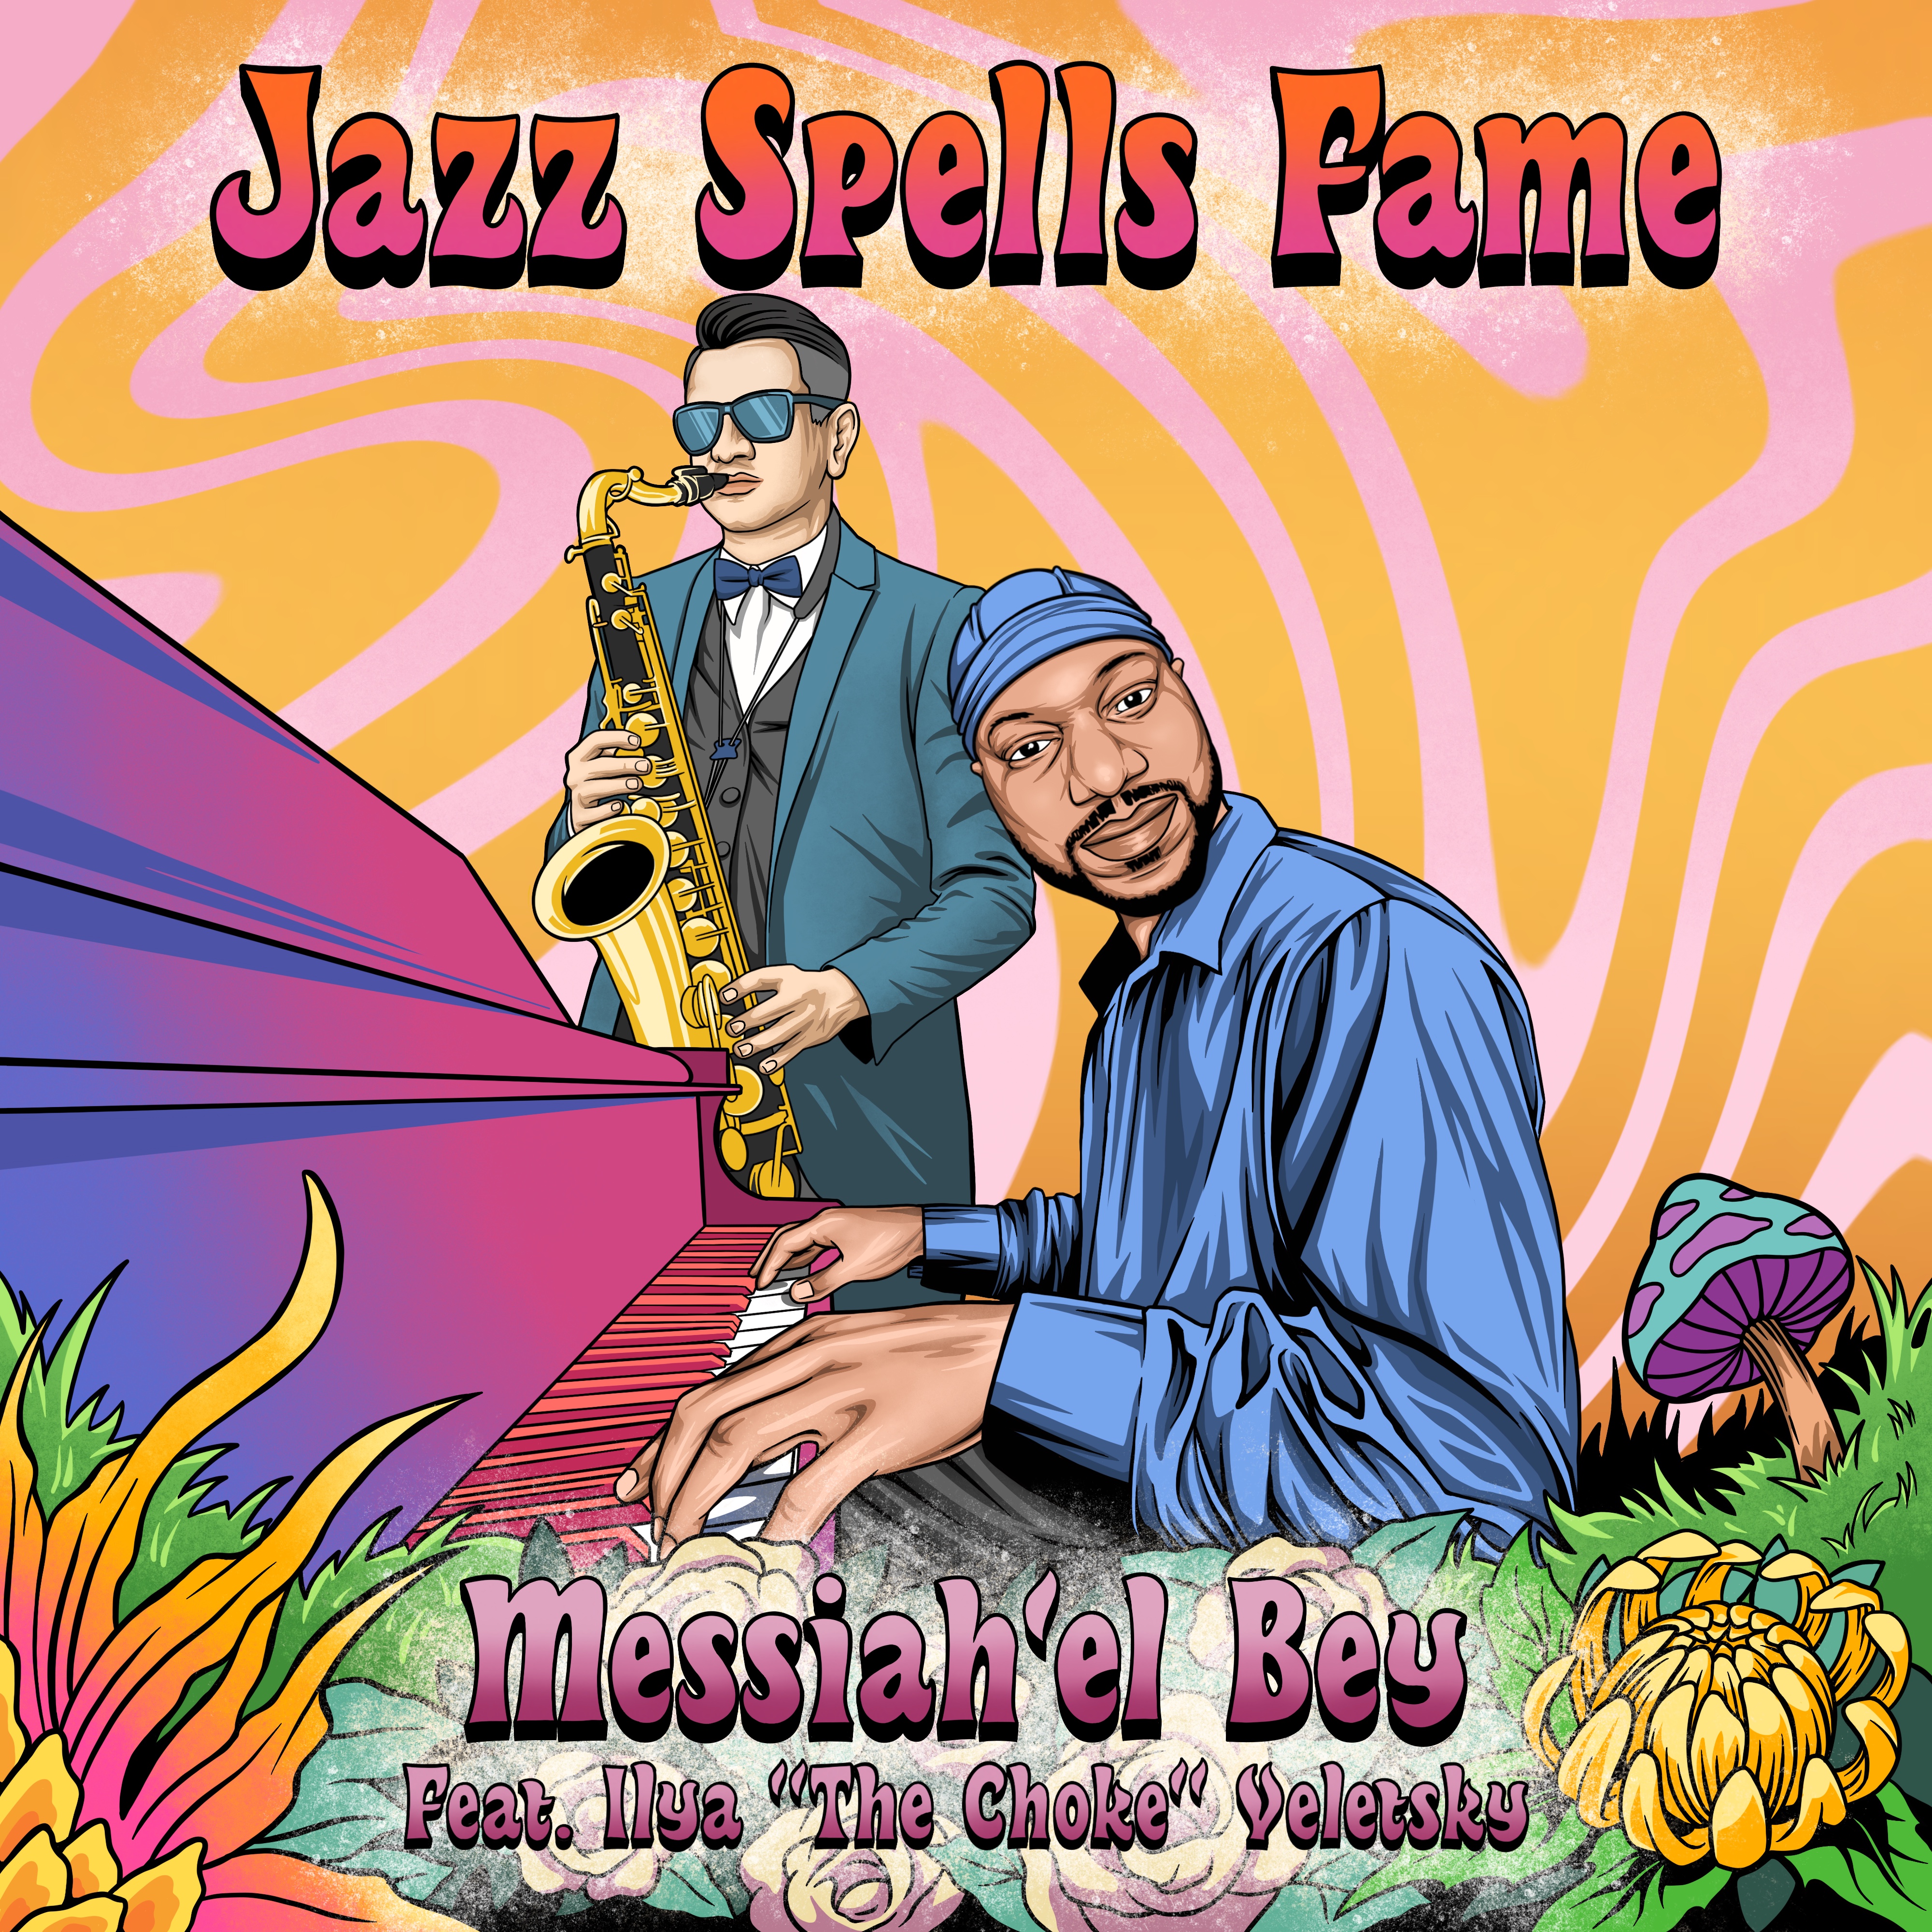 Messiah’el Bey Drops A Masterpiece With His New Album "Jazz Spells Fame"